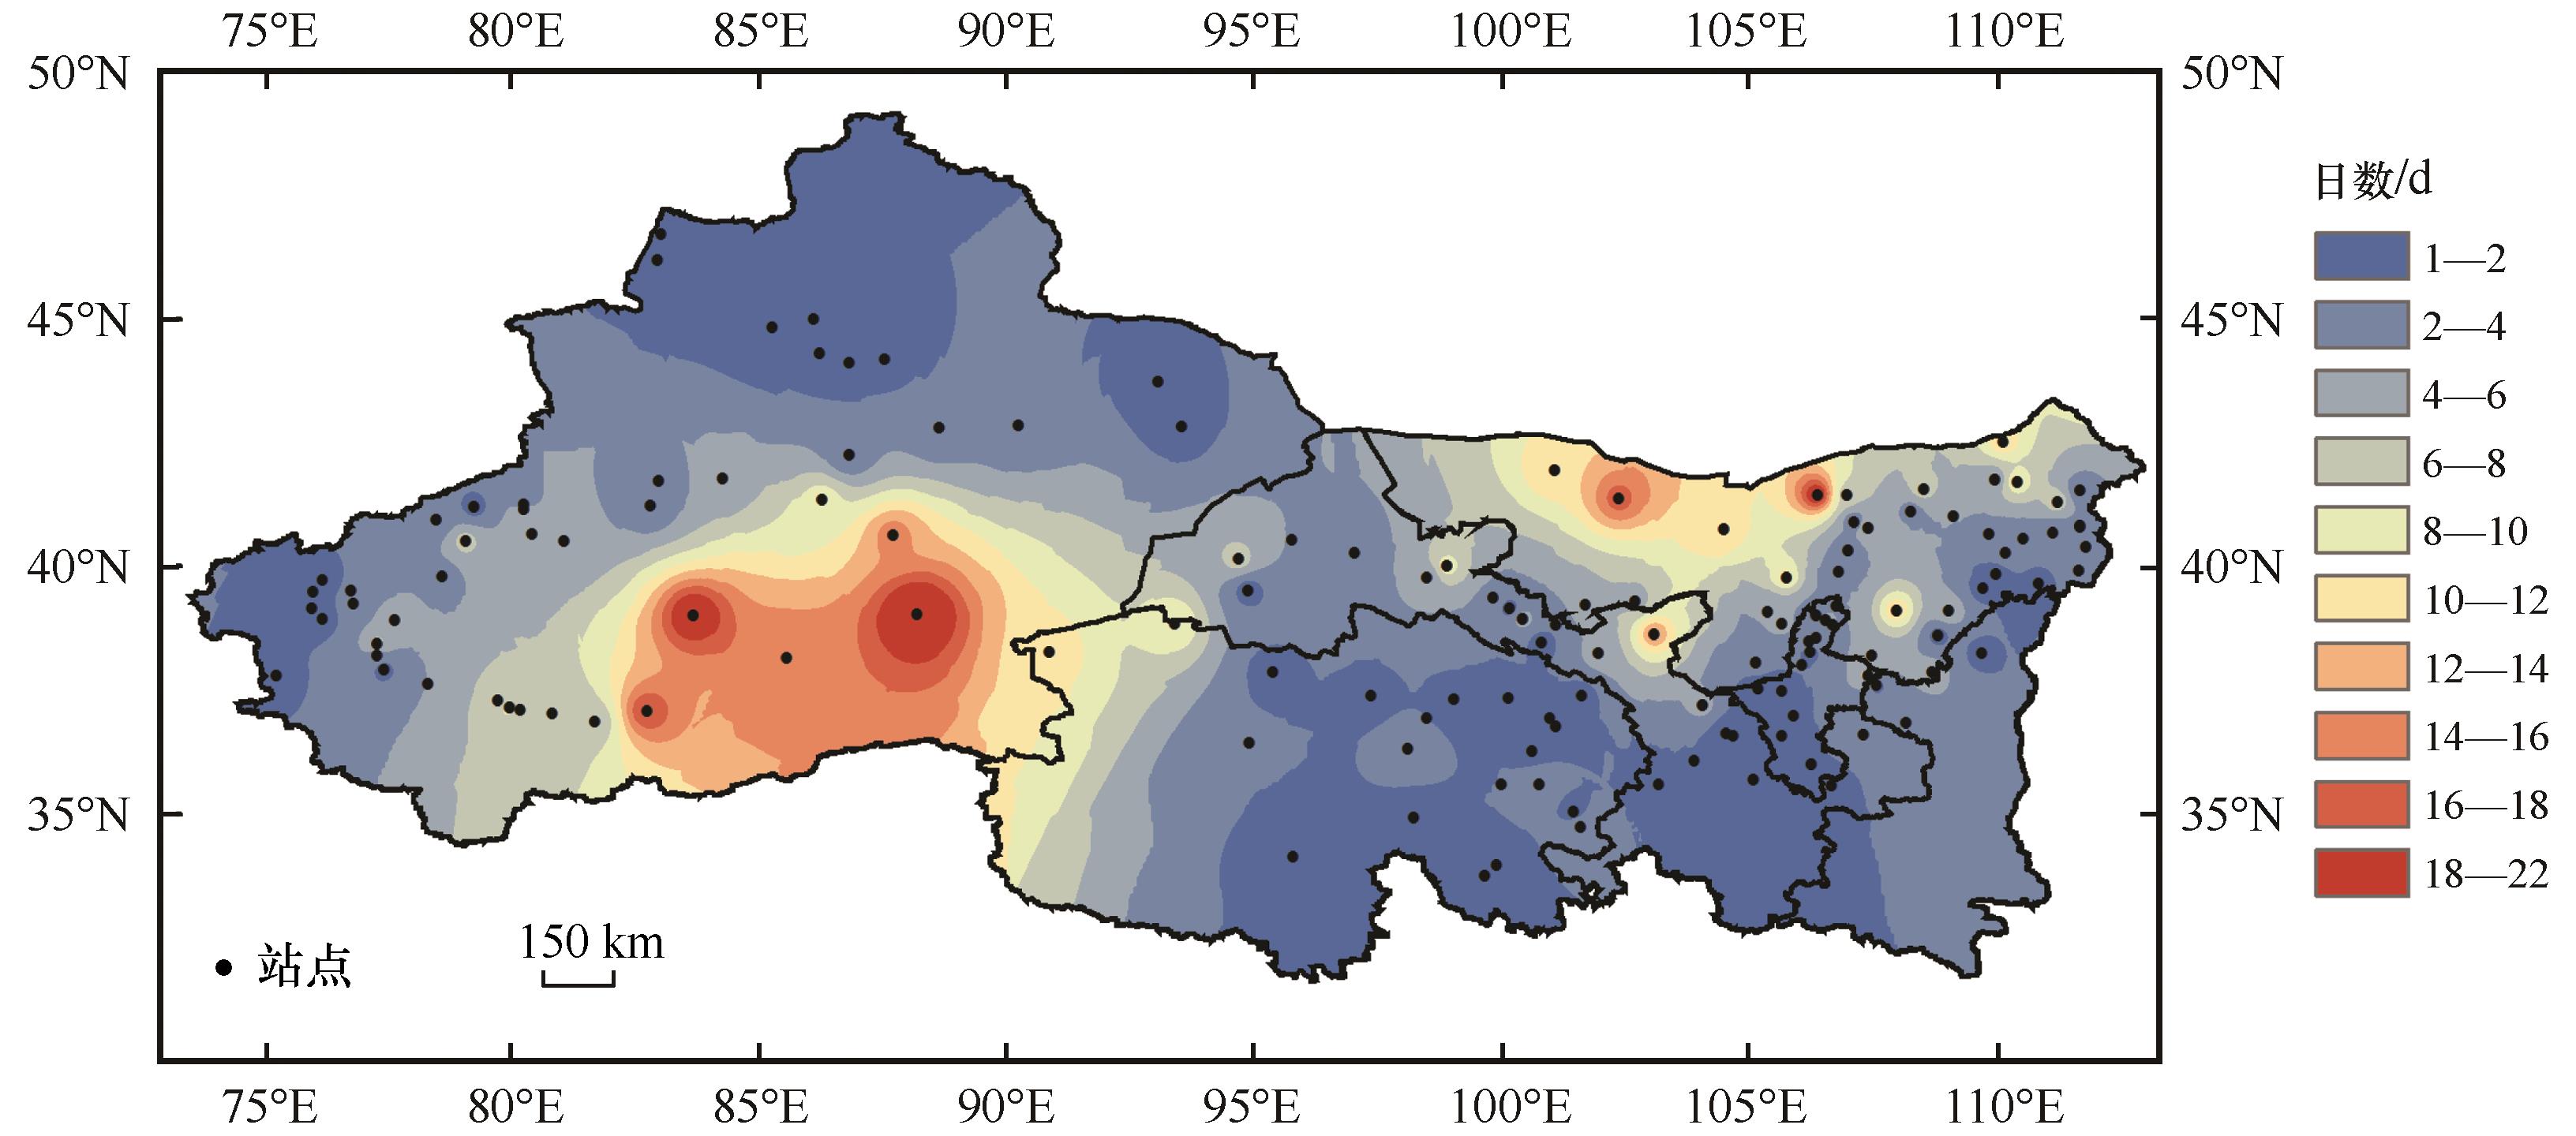 Characteristics and causes of regional sandstorms in Northwest of China from 2000 to 2020